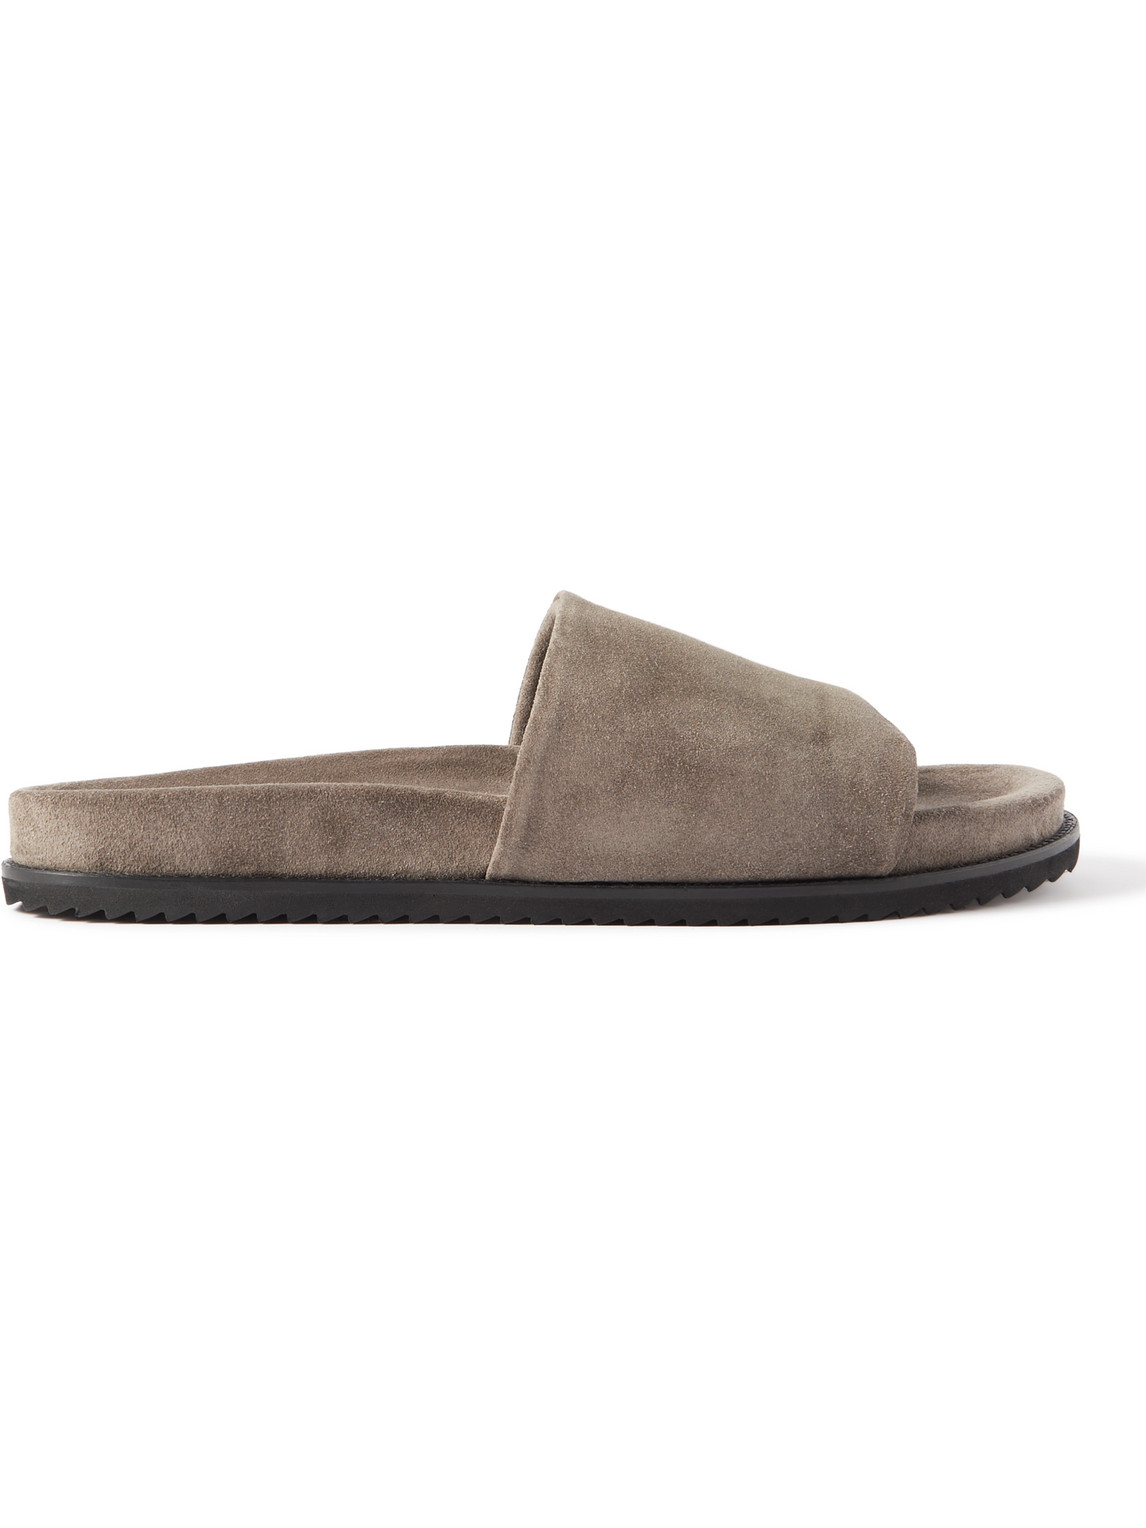 Mr P David Regenerated Suede By Evolo® Sandals In Brown